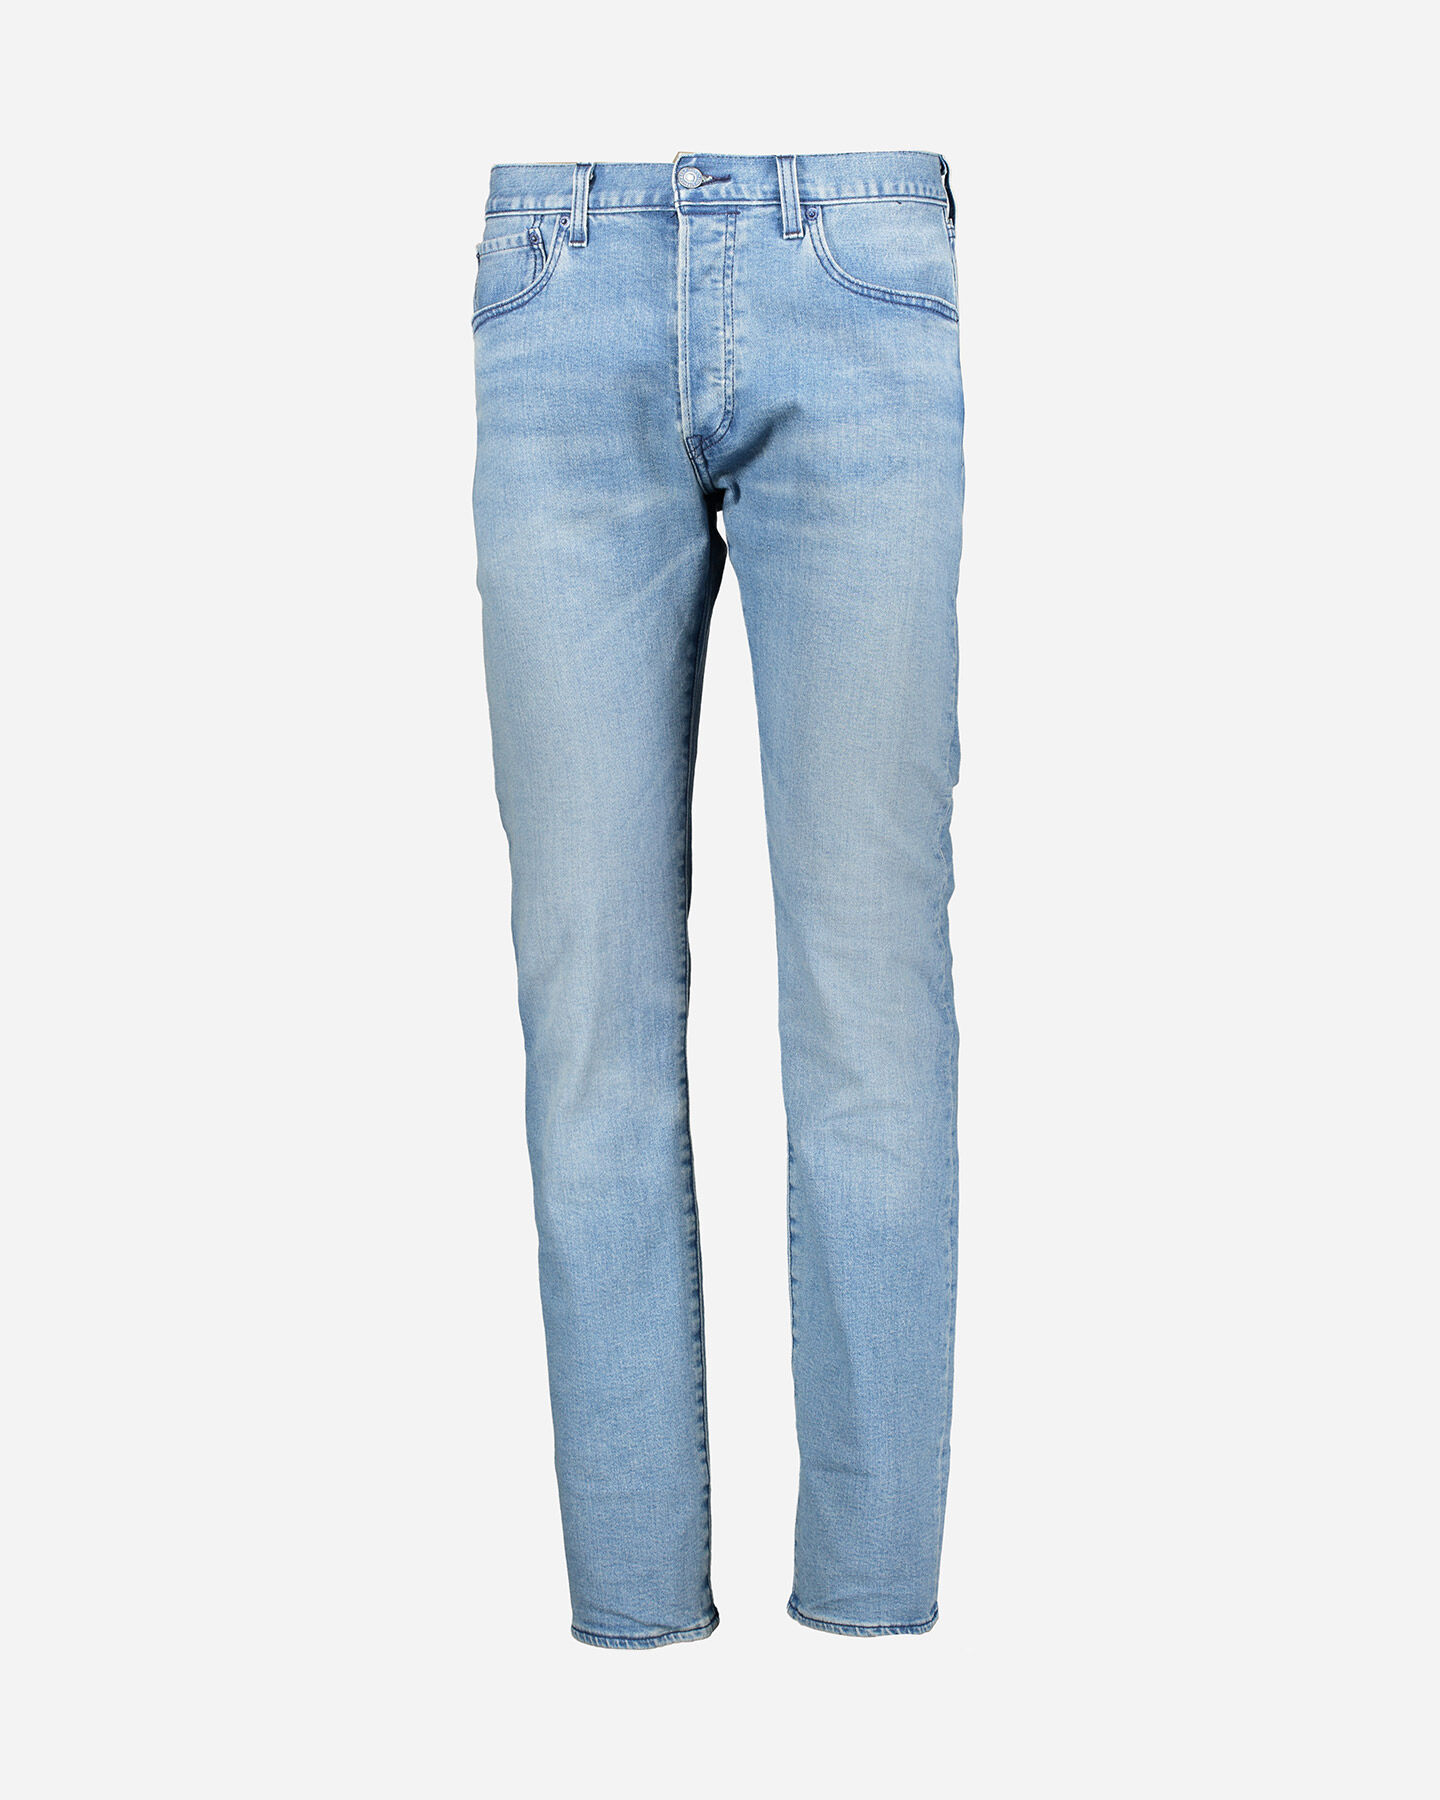  Jeans LEVI'S 501 REGULAR M S4076908|3000|30 scatto 4